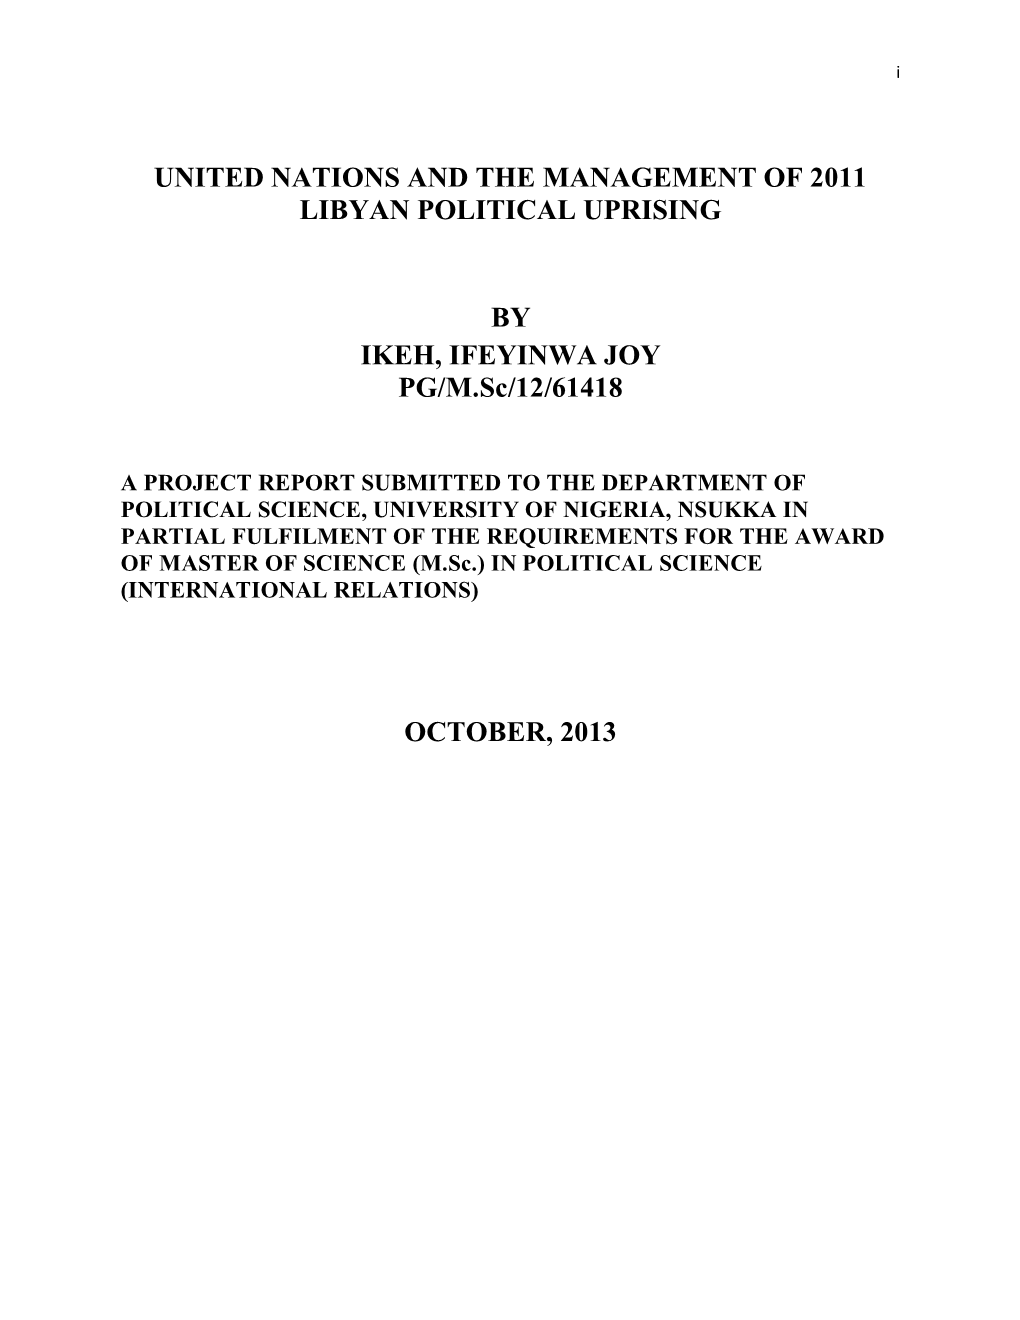 United Nations and the Management of 2011 Libyan Political Uprising